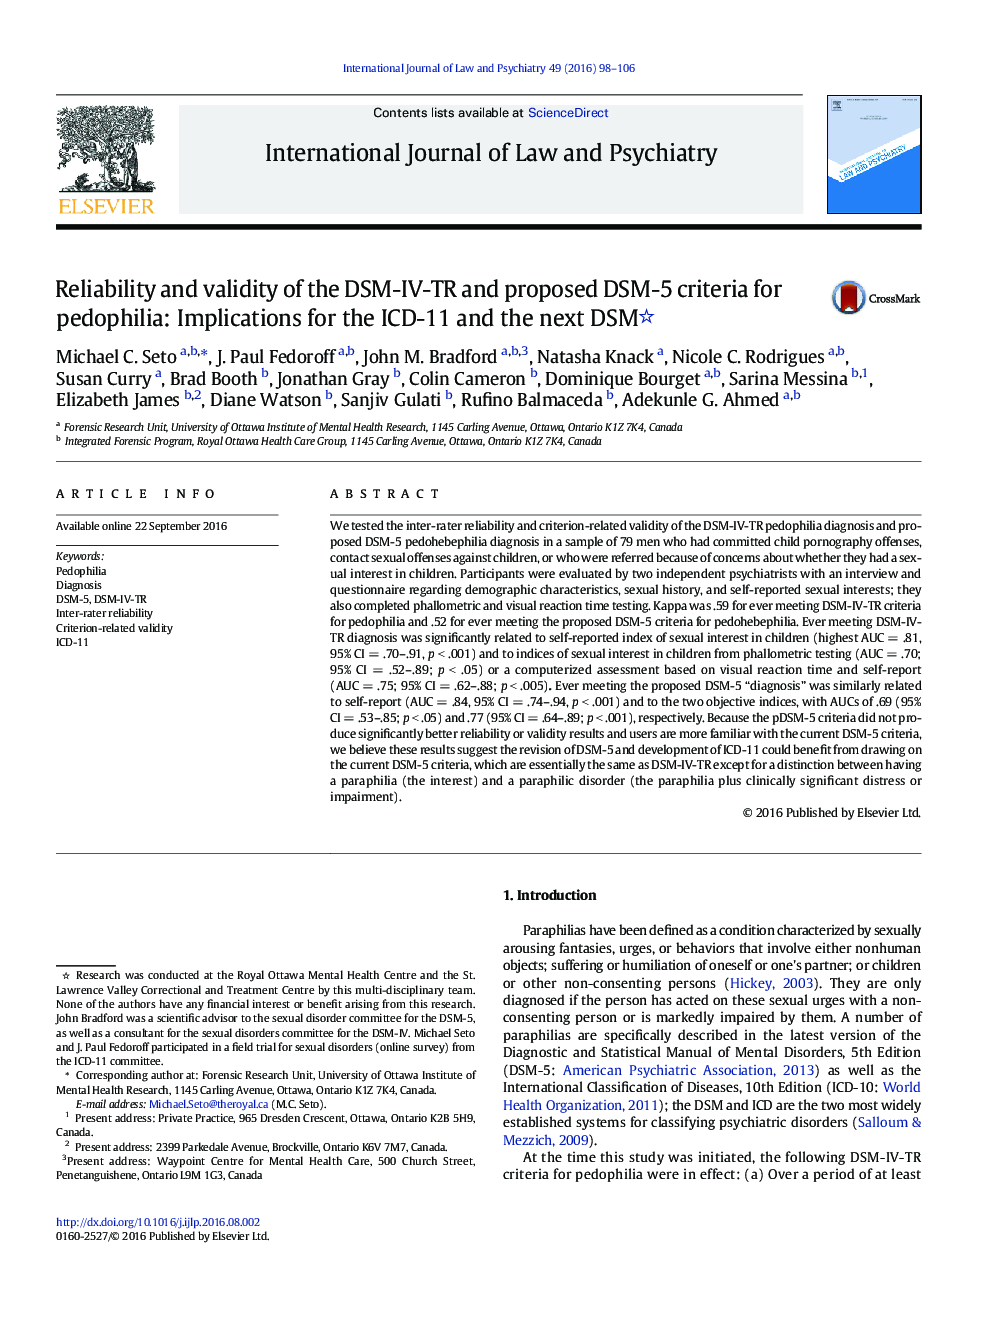 Reliability and validity of the DSM-IV-TR and proposed DSM-5 criteria for pedophilia: Implications for the ICD-11 and the next DSM